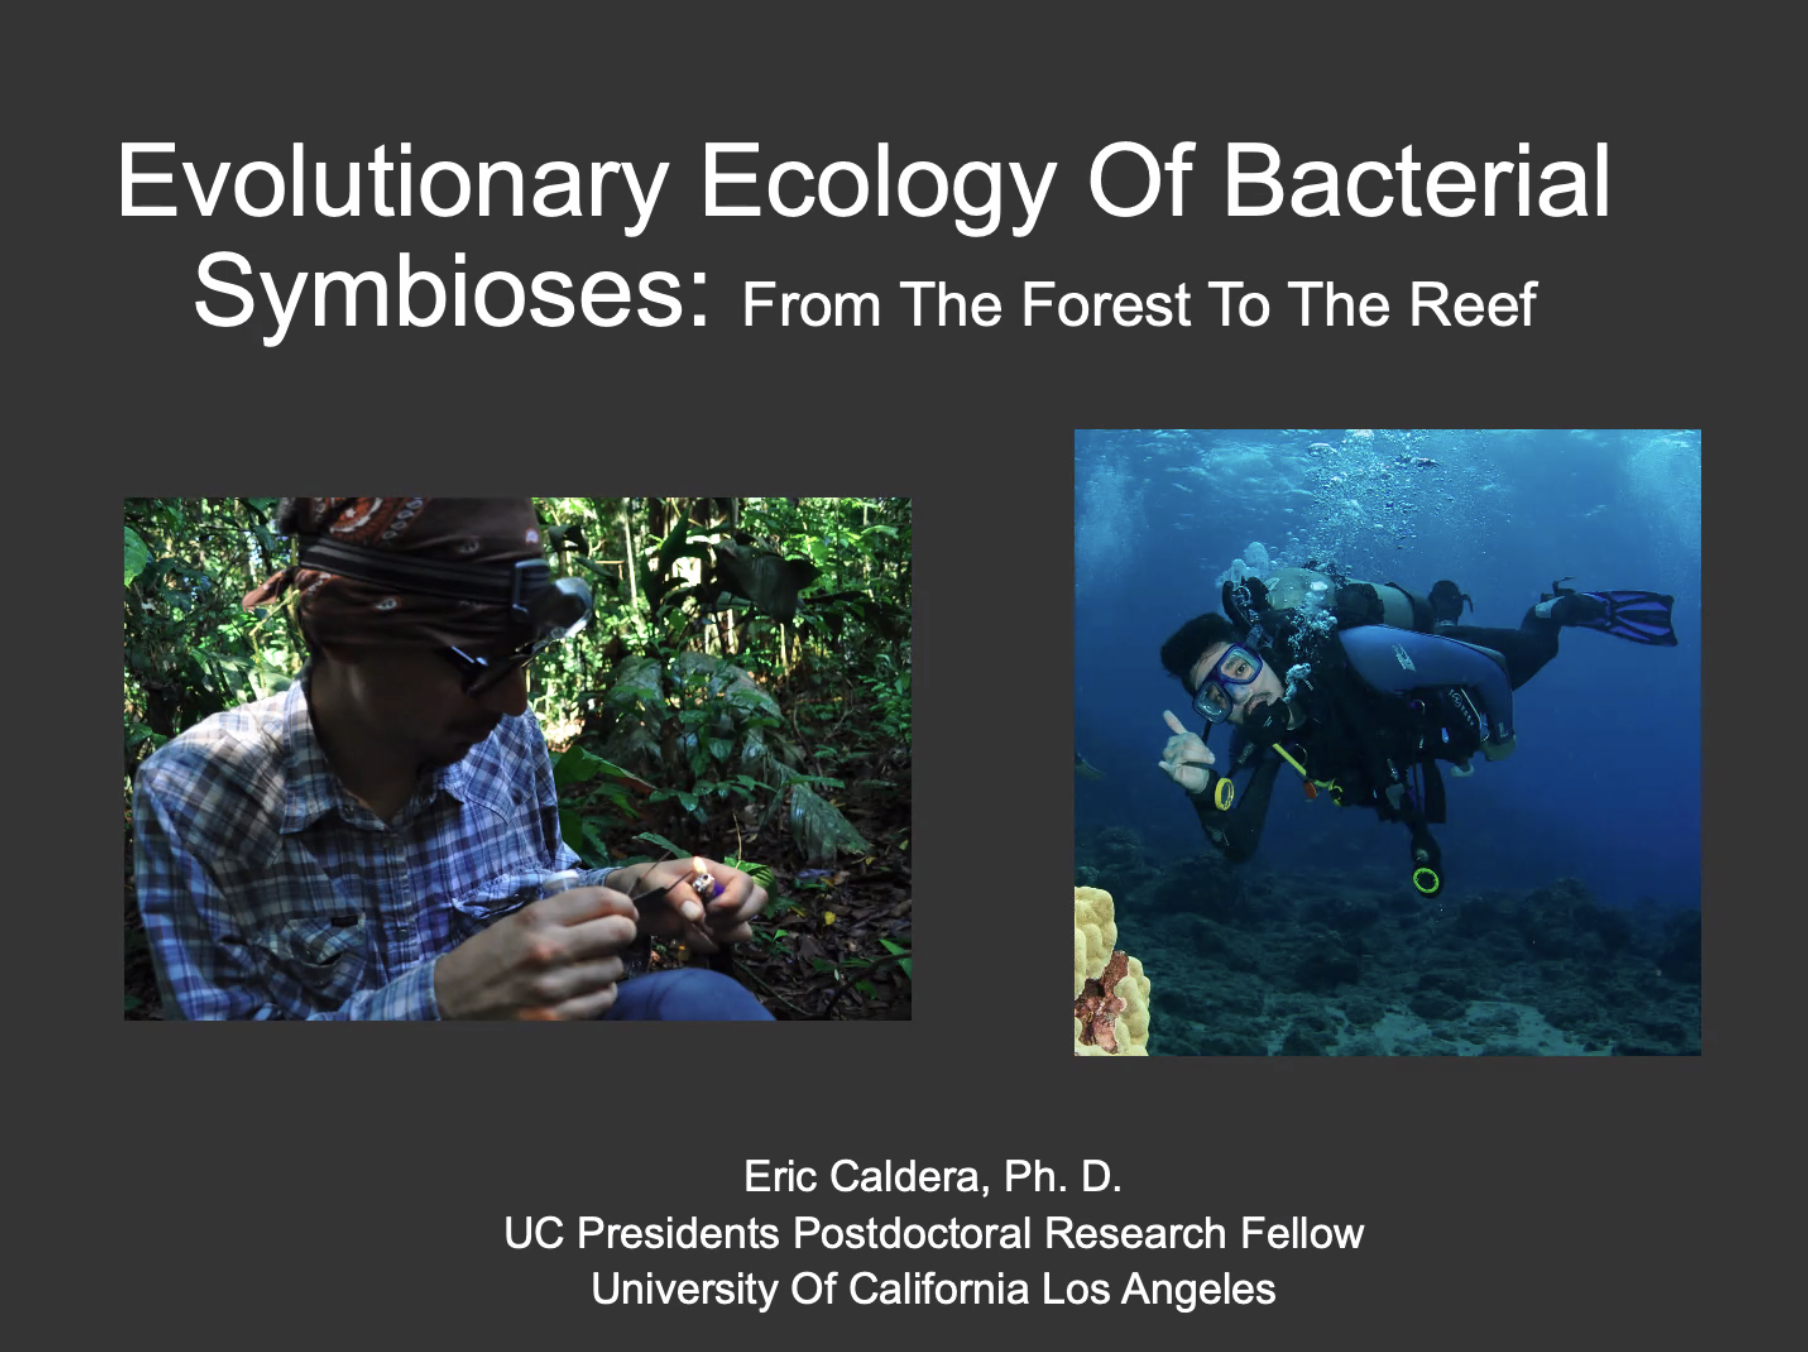 Bacterial Symbiosis: From the Forest to the Reef